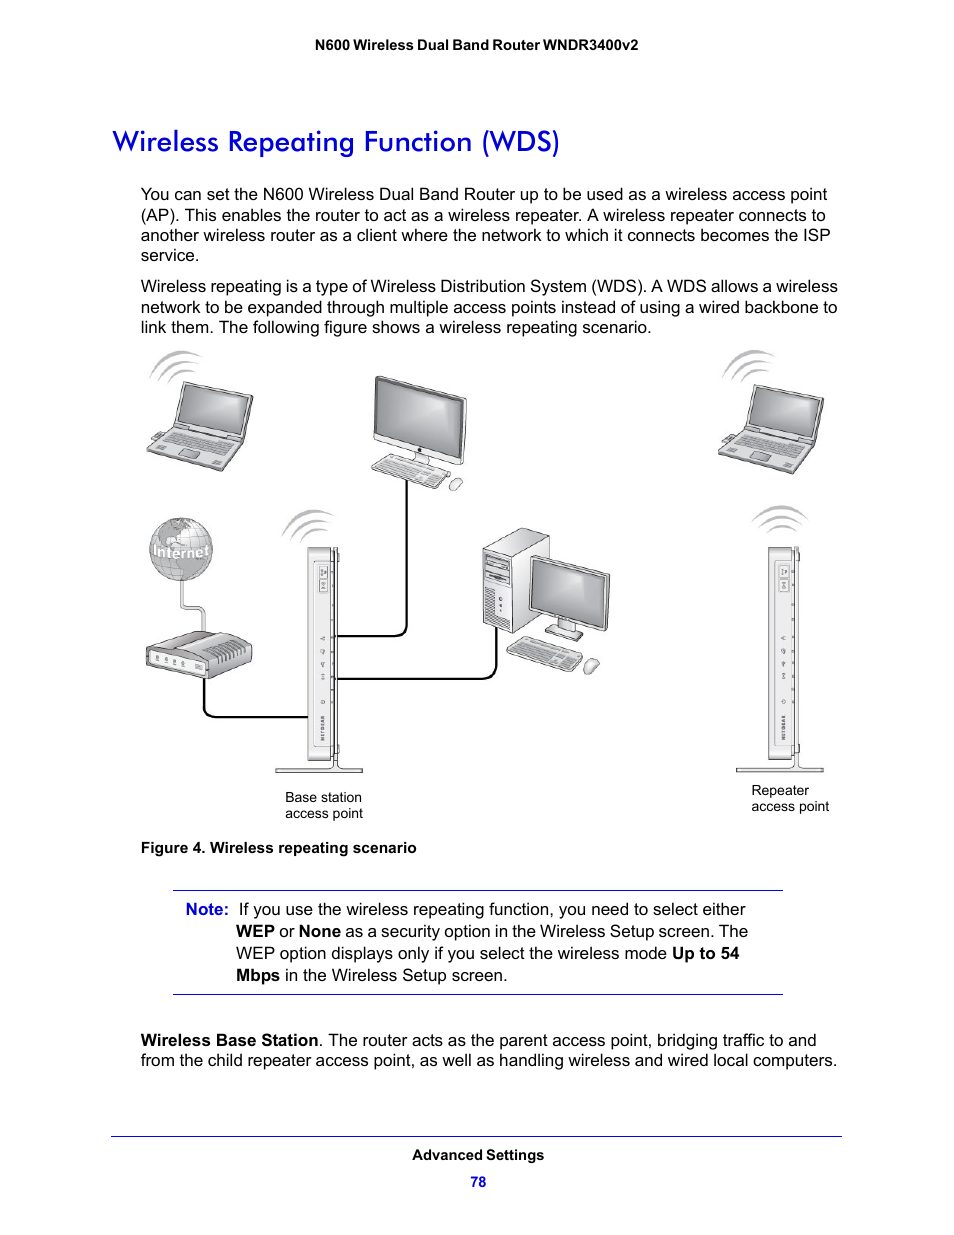 Wireless repeating function (wds) | NETGEAR N600 Wireless Dual Band Router  WNDR3400v2 User Manual | Page 78 / 120